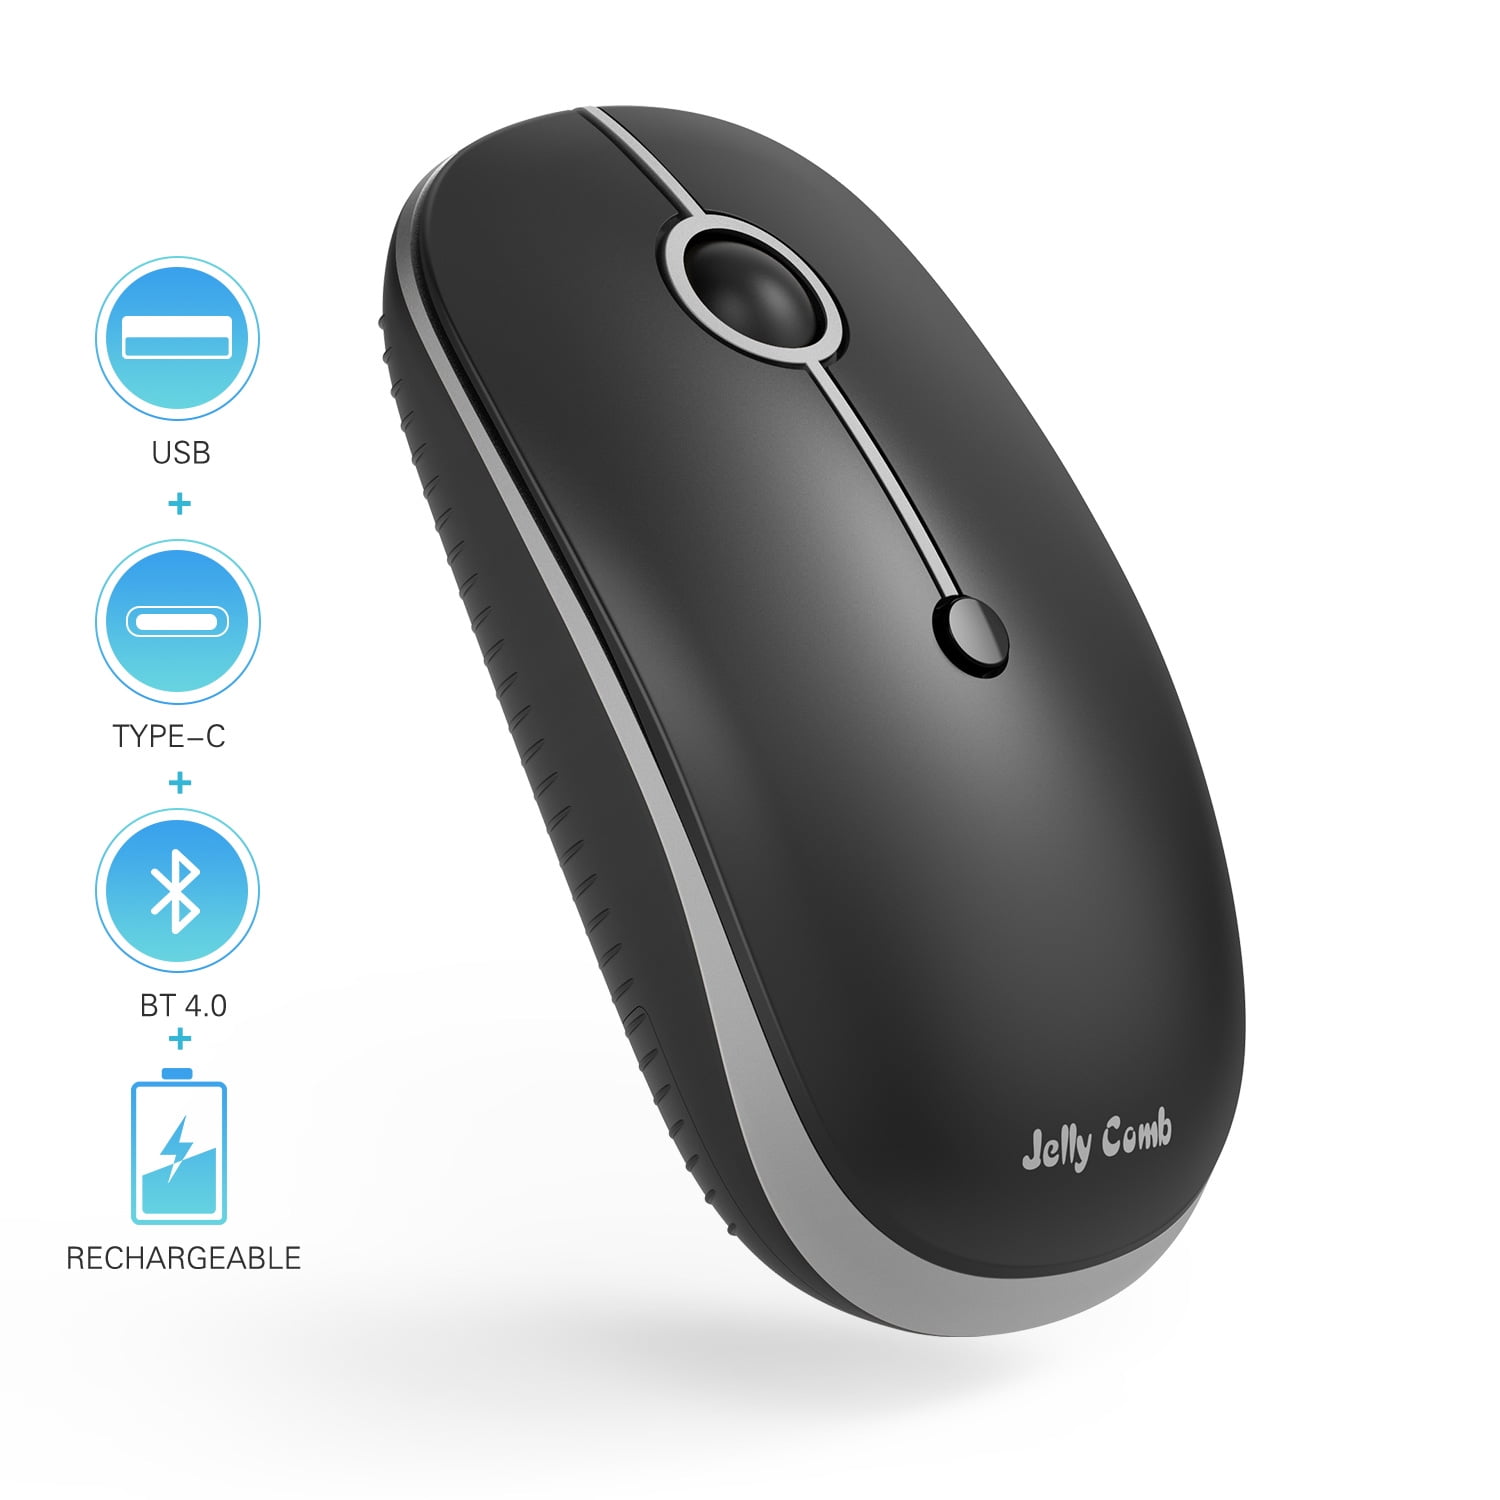 2.4GHz USB Connection Easy Switch up to 3 Devices Jelly Comb Ergonomic Multi-Device Wireless Mouse with Bluetooth Bluetooth Mouse 